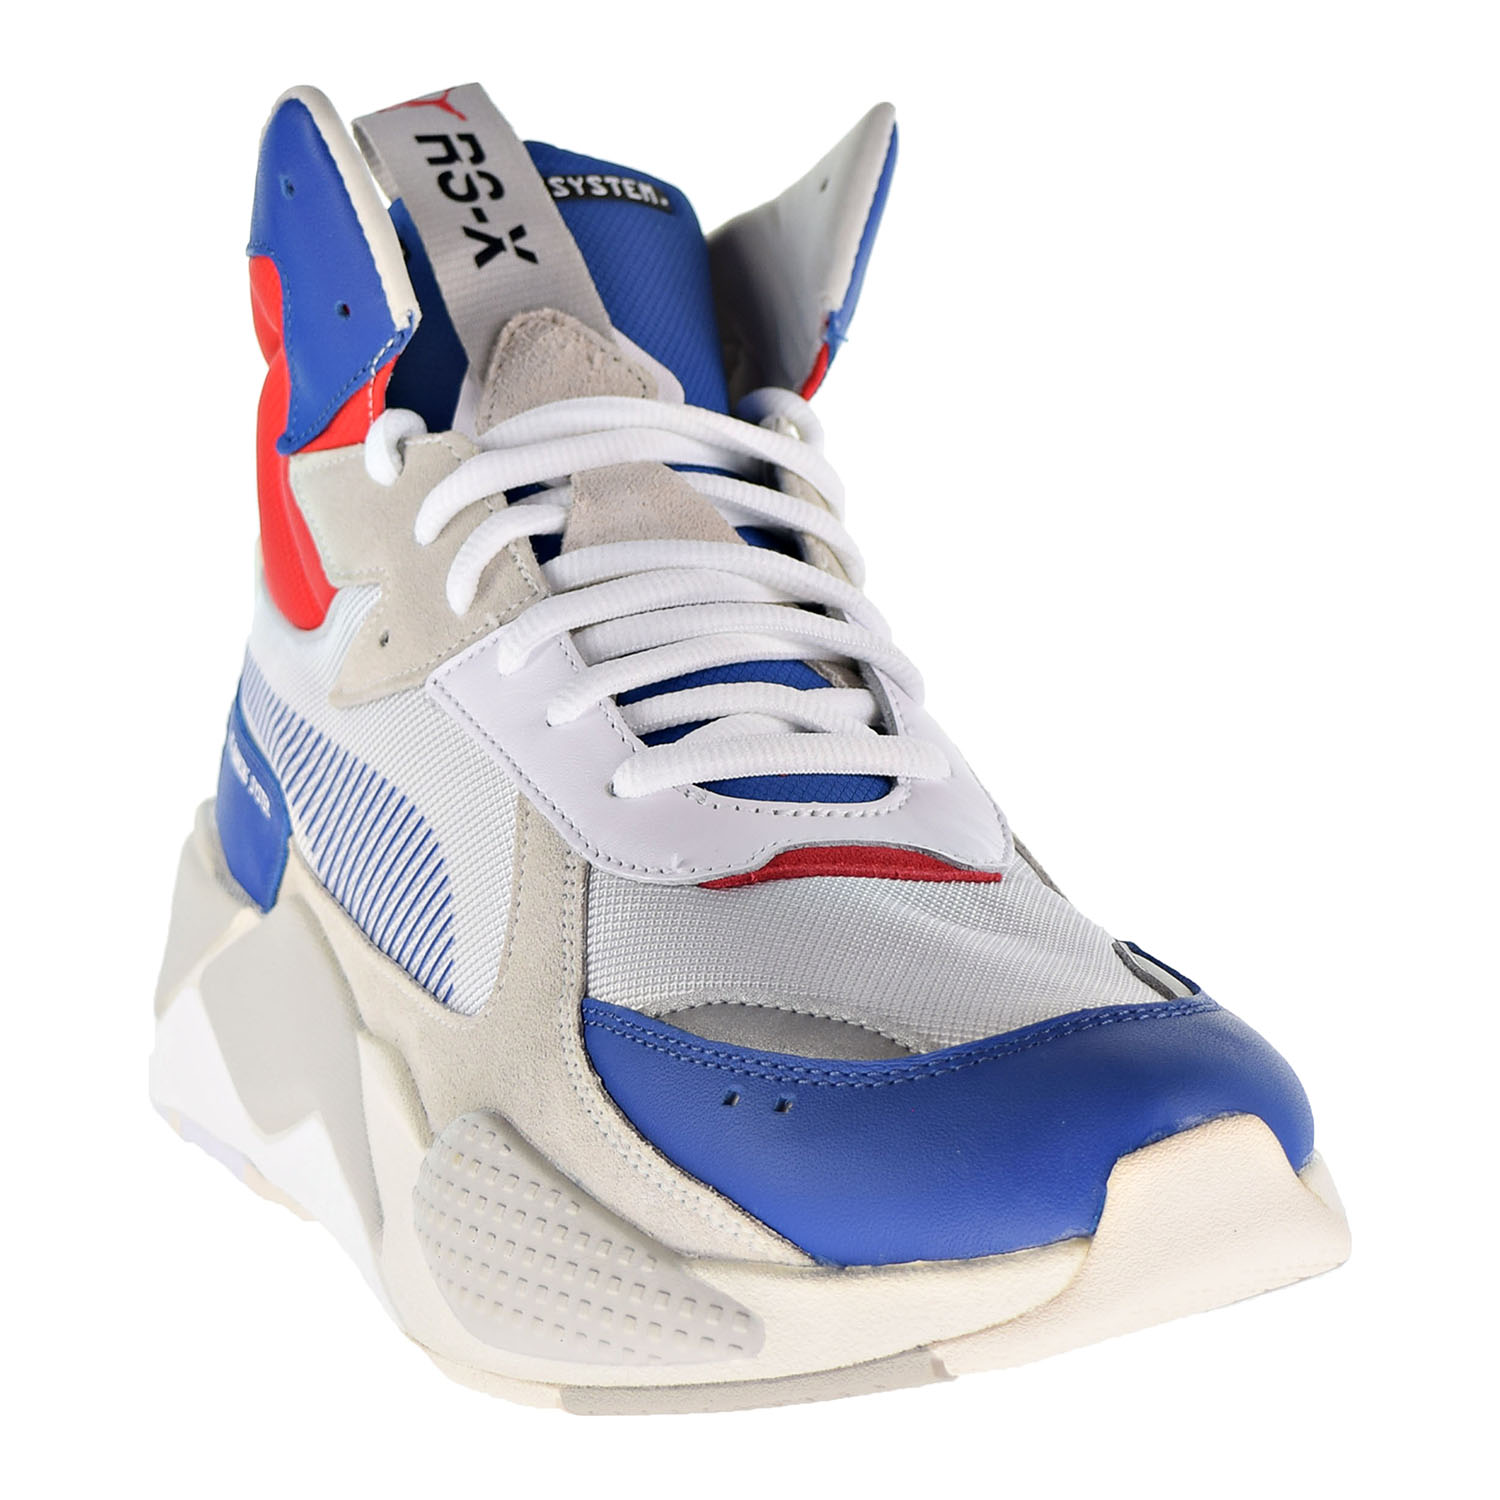 Drill Architecture nose Puma RS-X Midtop Utility Men's Shoes Galaxy Blue-Puma White 369821-02